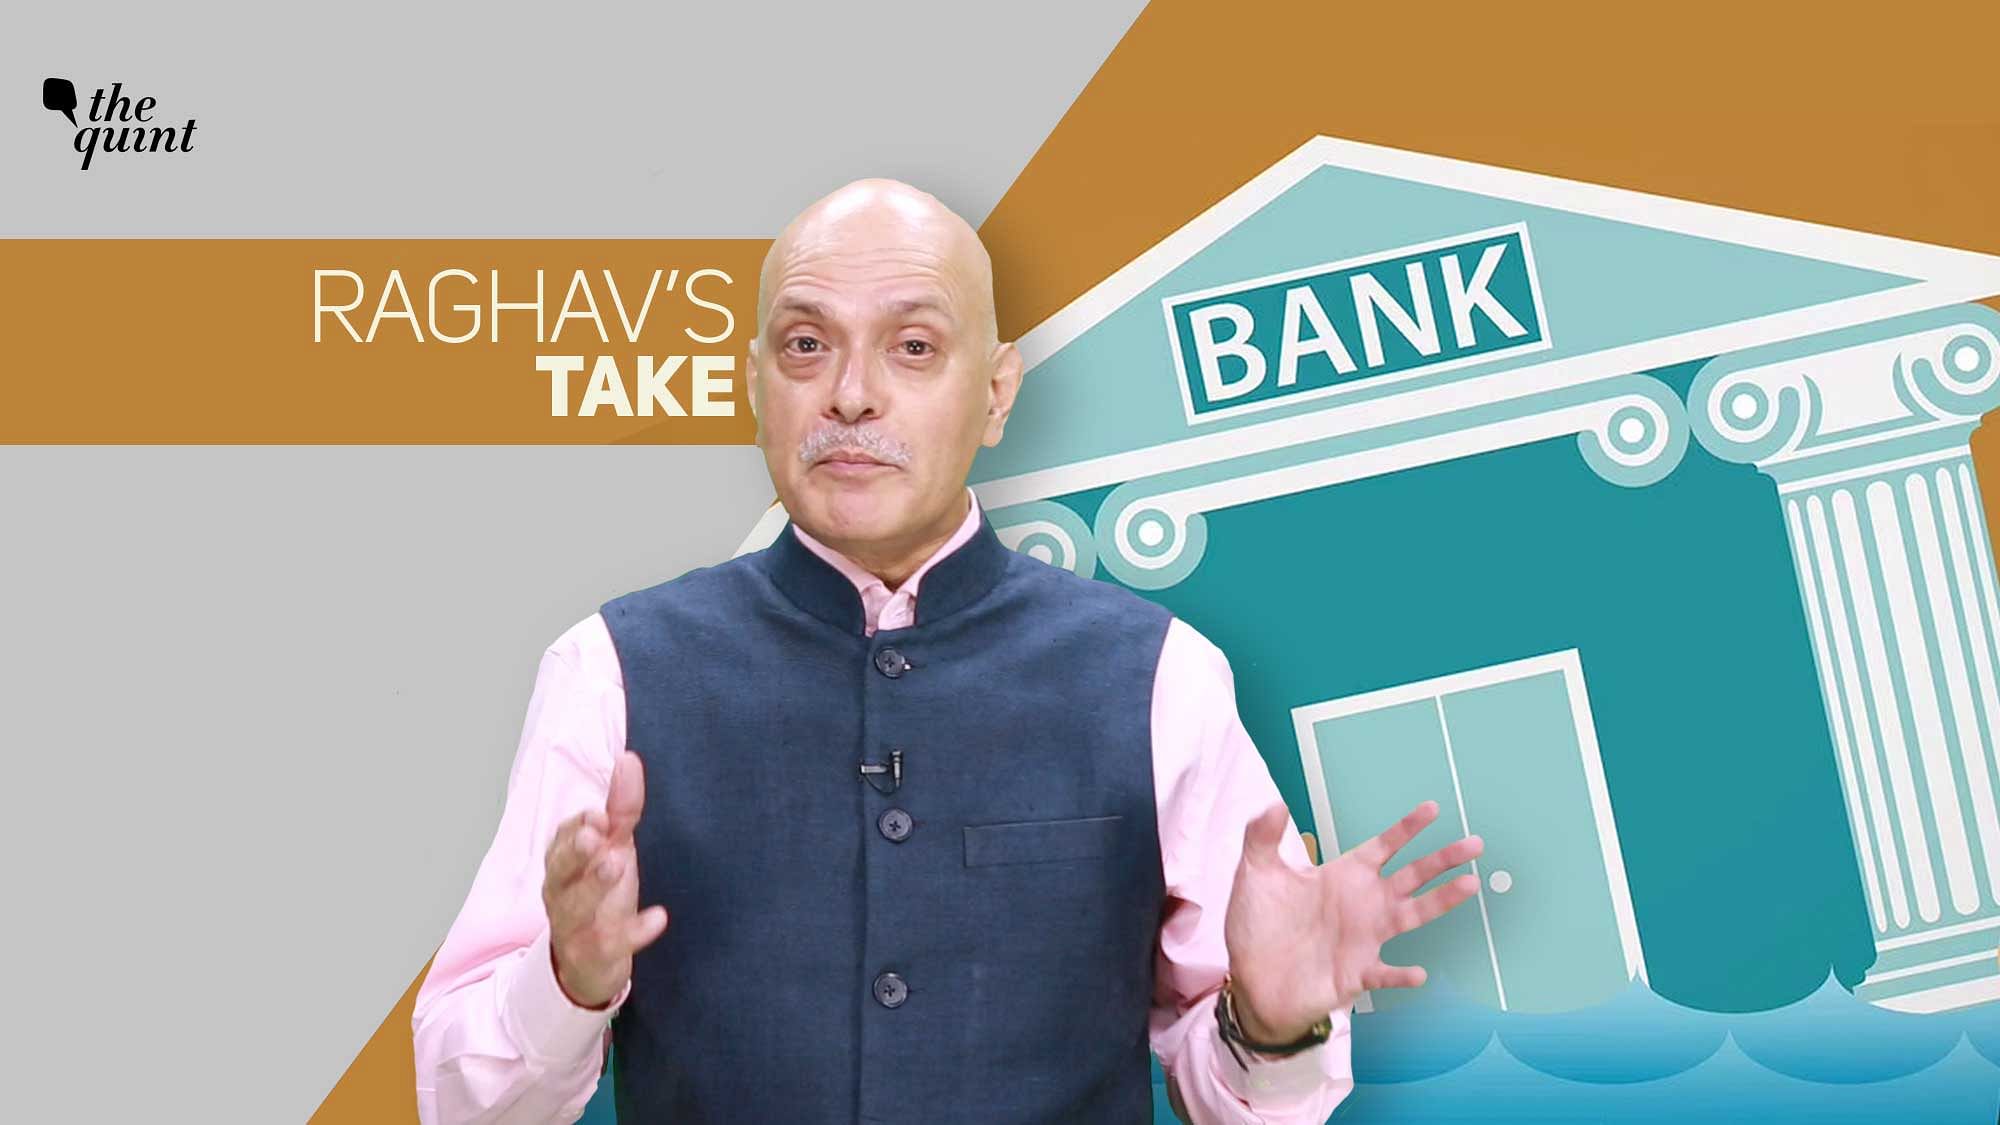 Indian financial sector’s second wave of non-performing assets and government’s initiative to allow students headed abroad to break the vaccine queue, <b>The Quint</b>‘s Editor-in-Chief Raghav Bahl shares his views on some recent and pertinent developments.